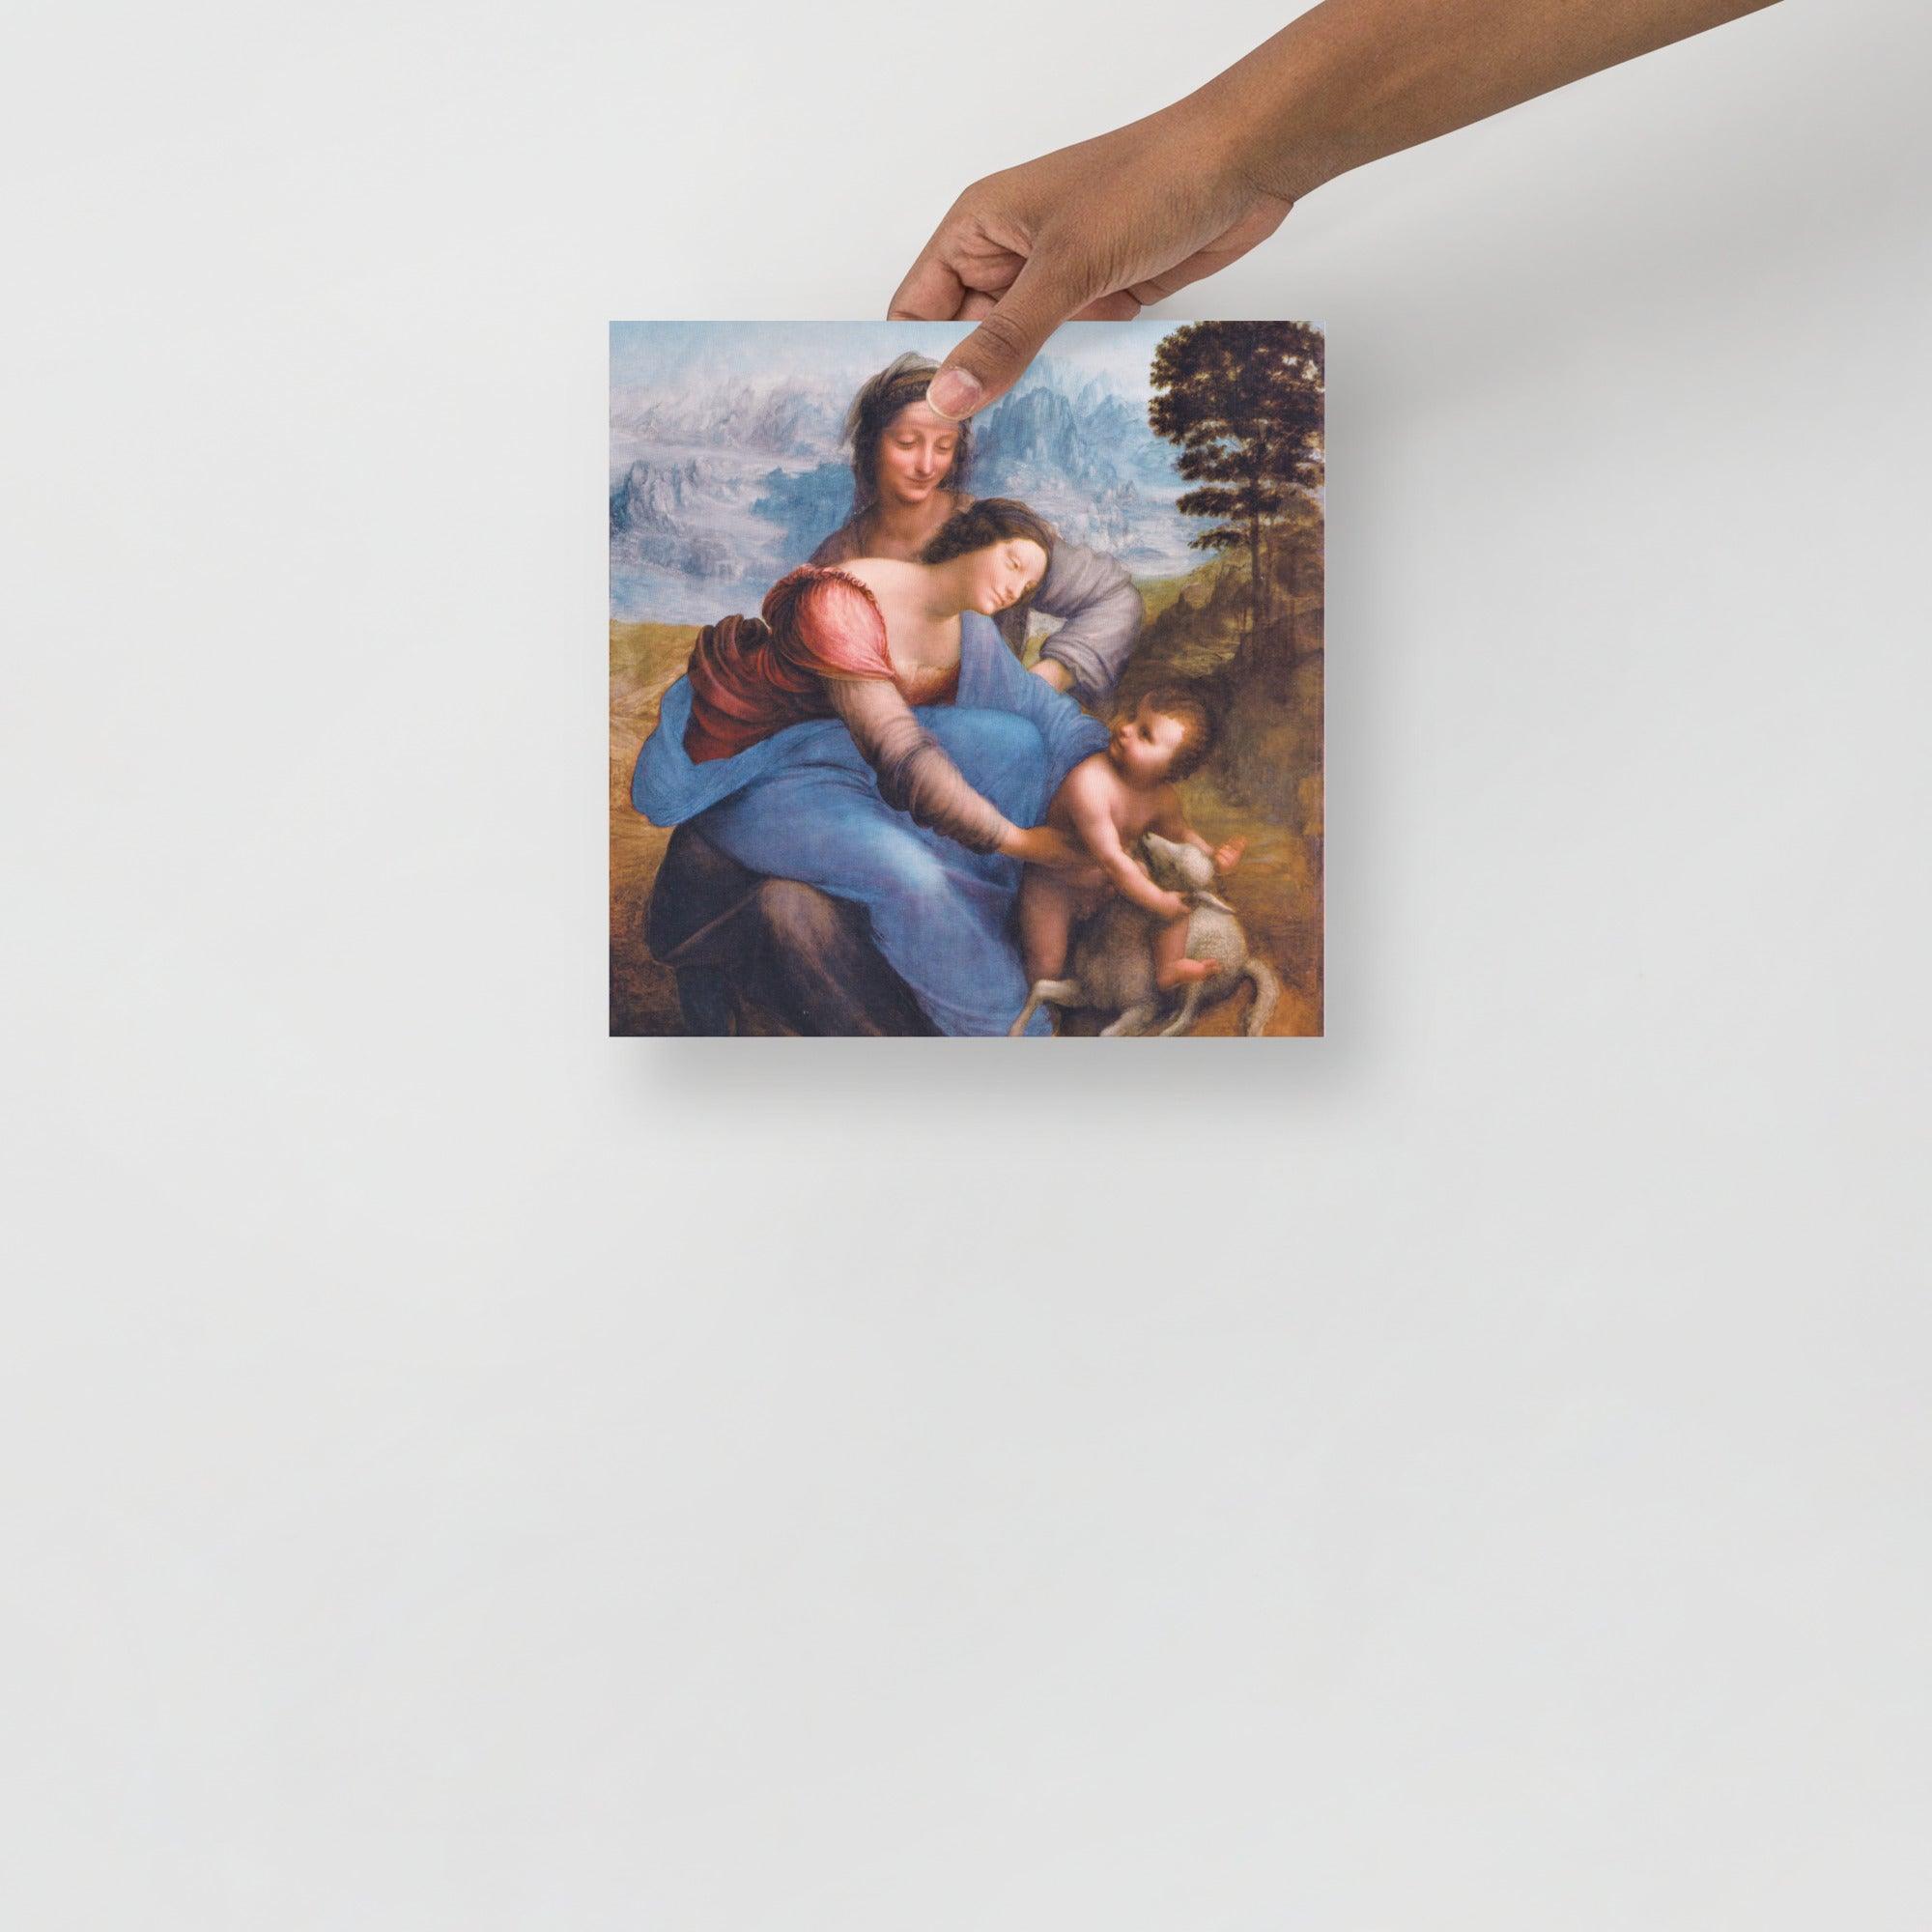 The Virgin and Child with Saint Anne by Leonardo da Vinci poster on a plain backdrop in size 10x10”.